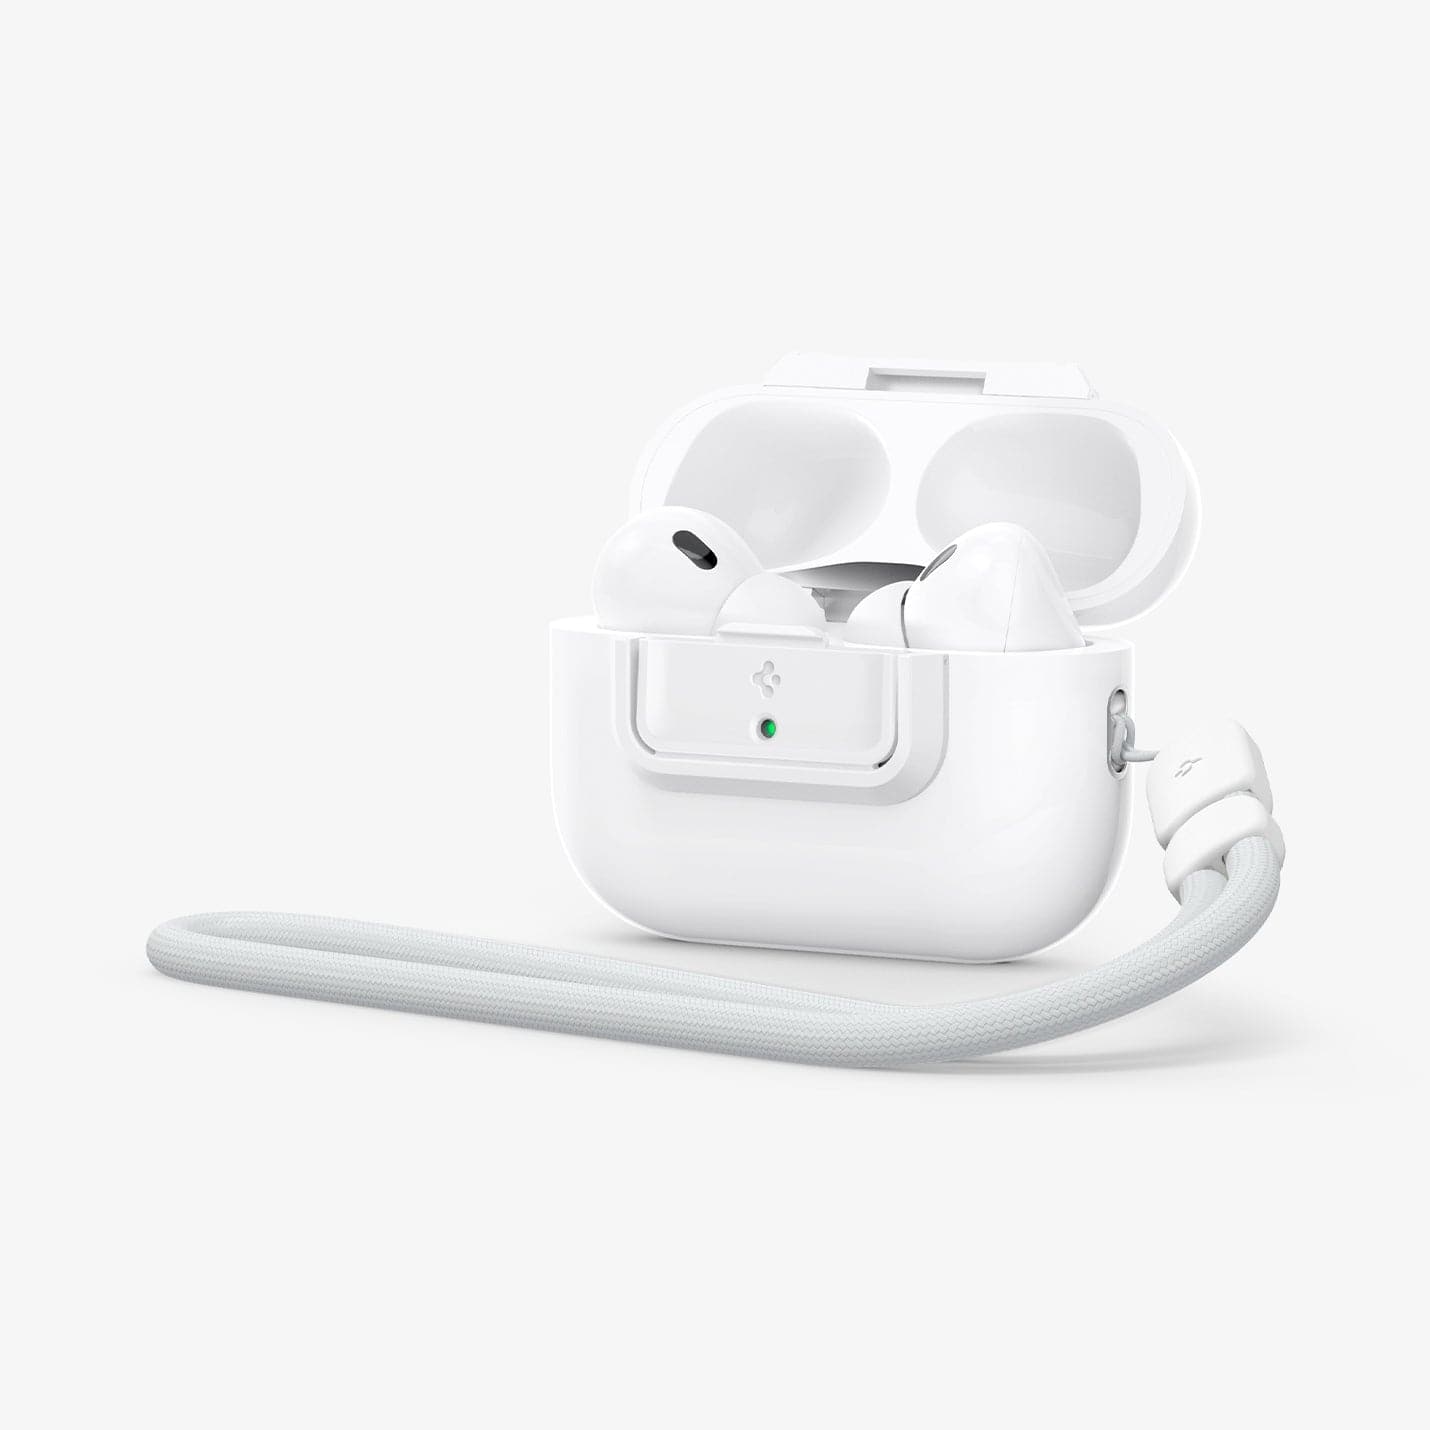 ASD06090 - Apple AirPods Pro / AirPods Pro 2 Case Lock Fit in white showing the front, side with lanyard and top open with AirPods inside